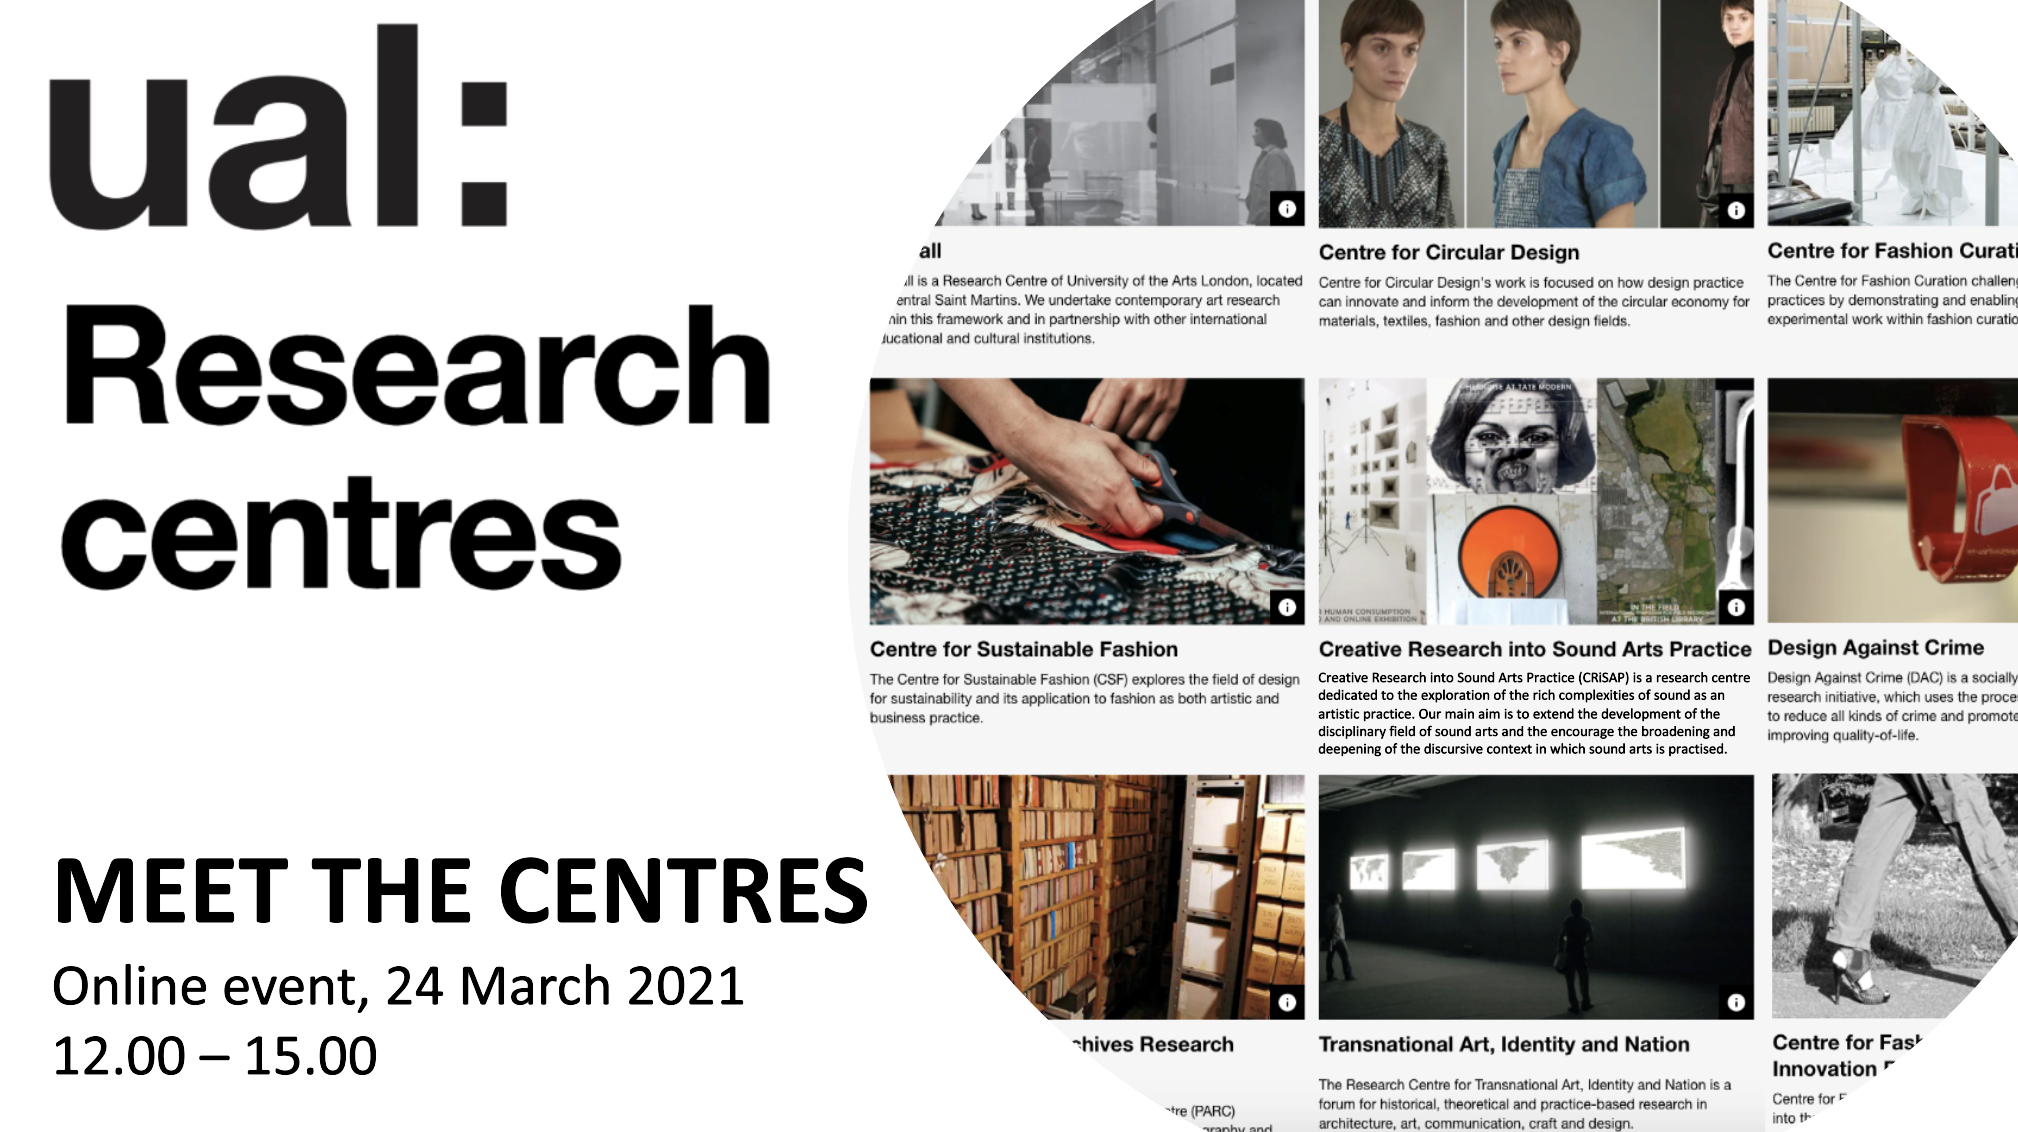 "UAL Research Centres: Meet the Centres" poster with images for each centre